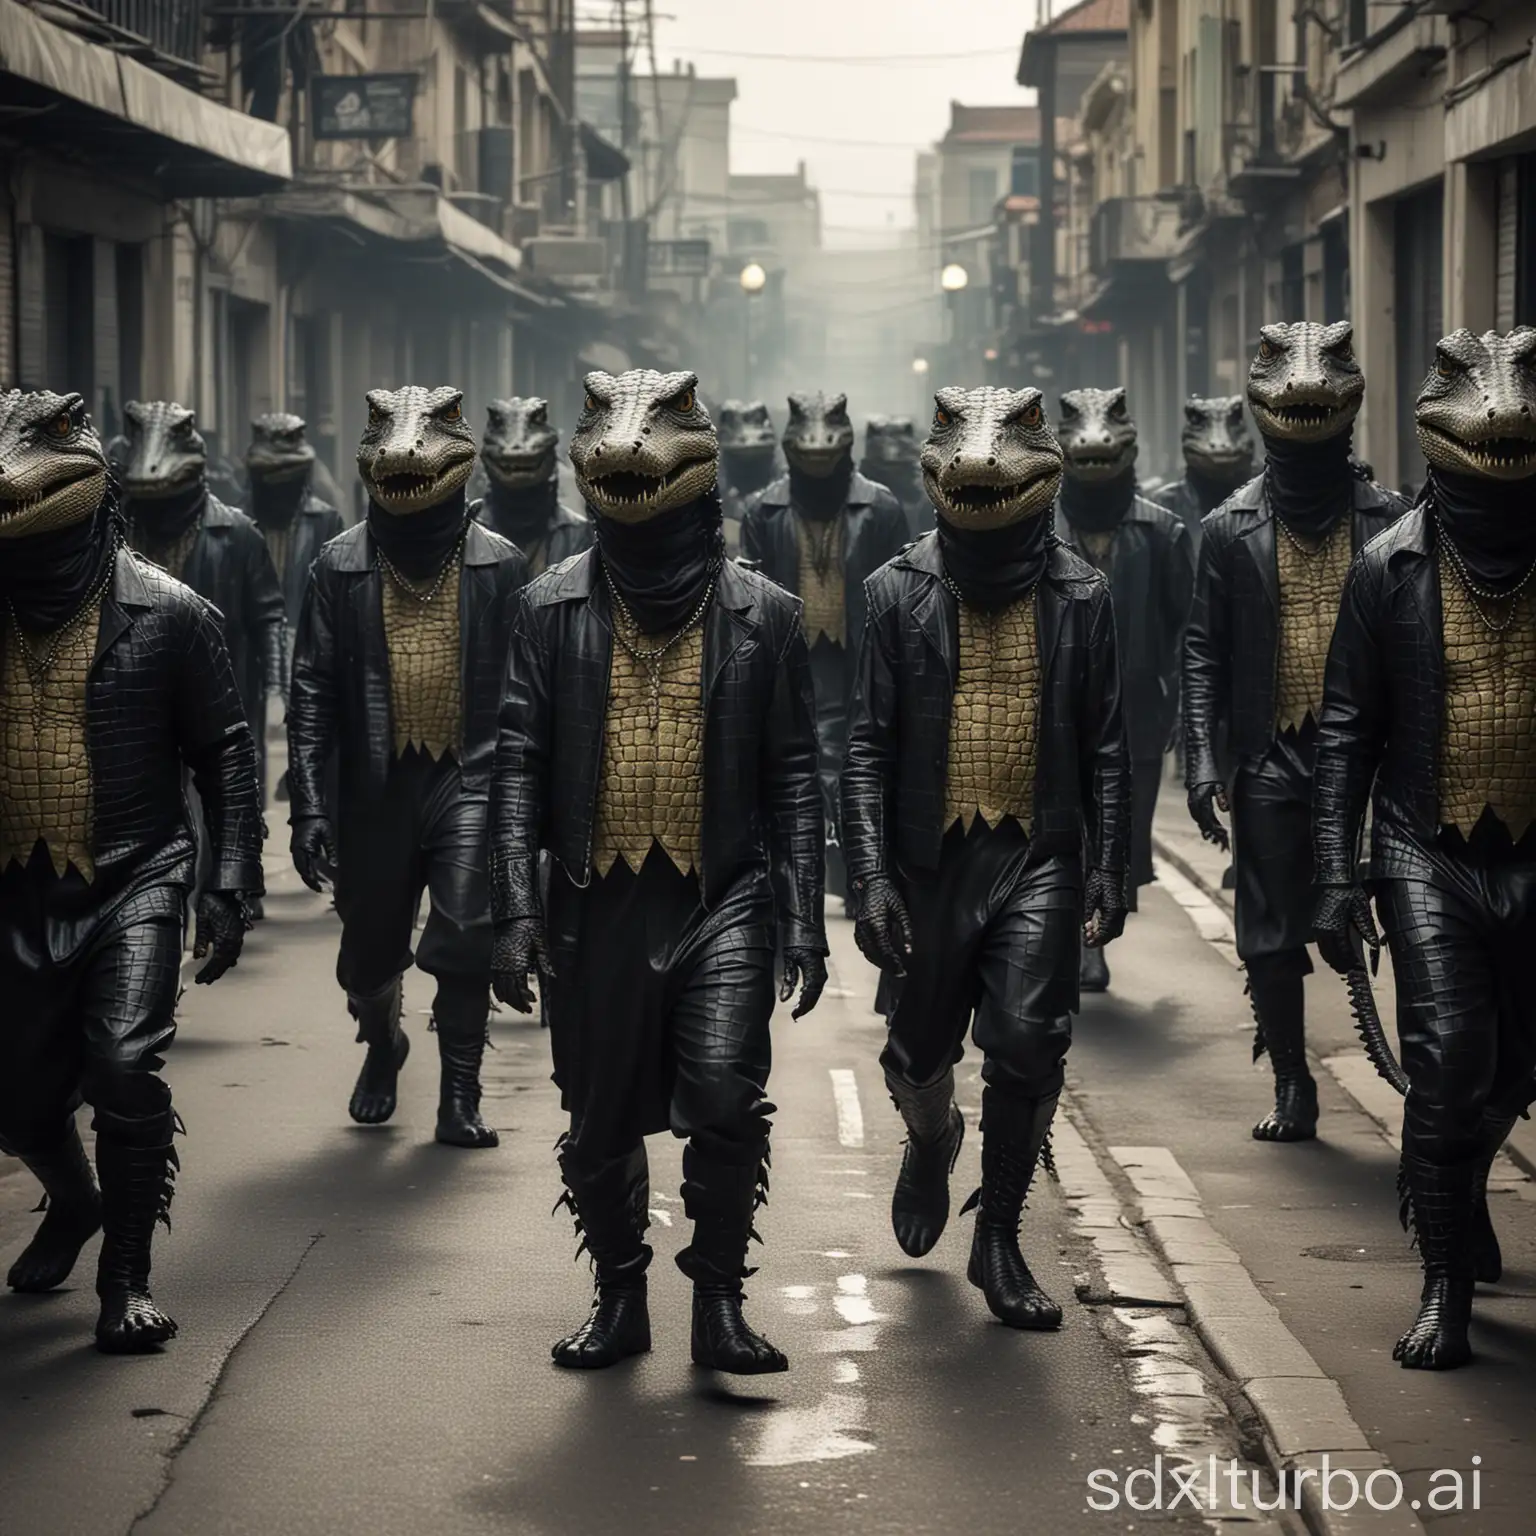 Mysterious-Gang-of-Crocodile-Criminals-Stride-Down-Dark-Streets